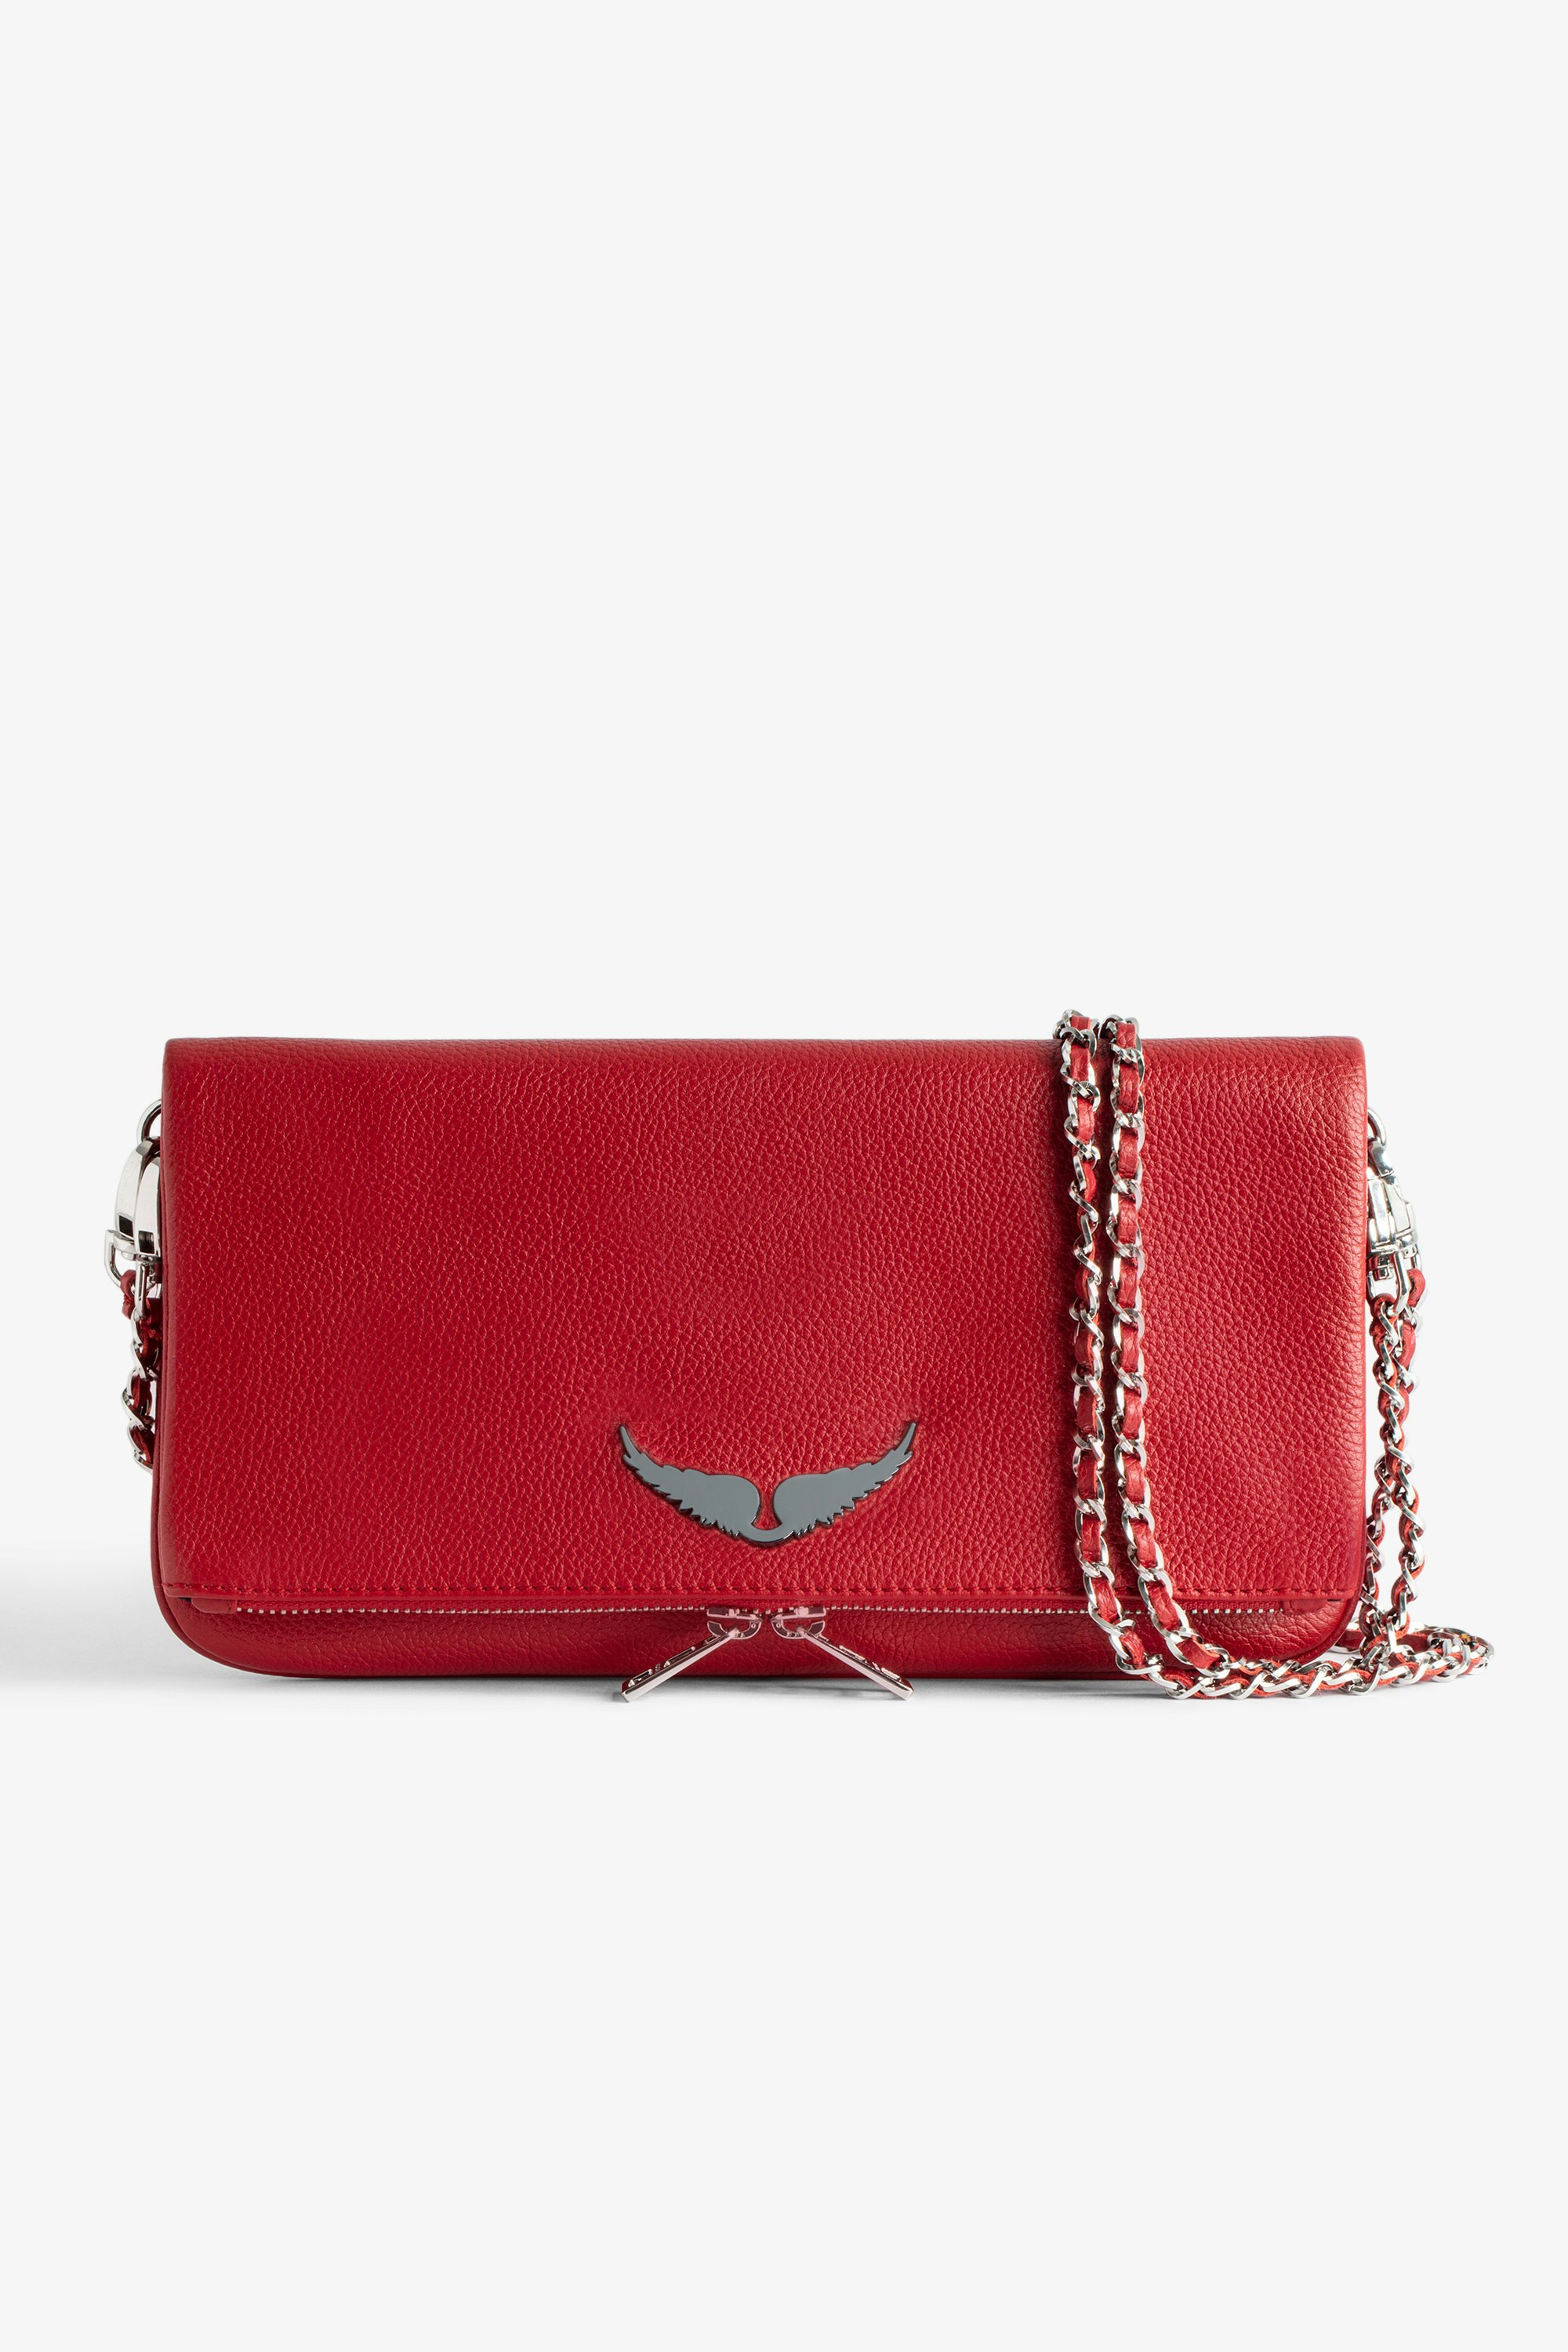 Rock Clutch Women’s red grained leather clutch bag with double leather and metal chain strap.